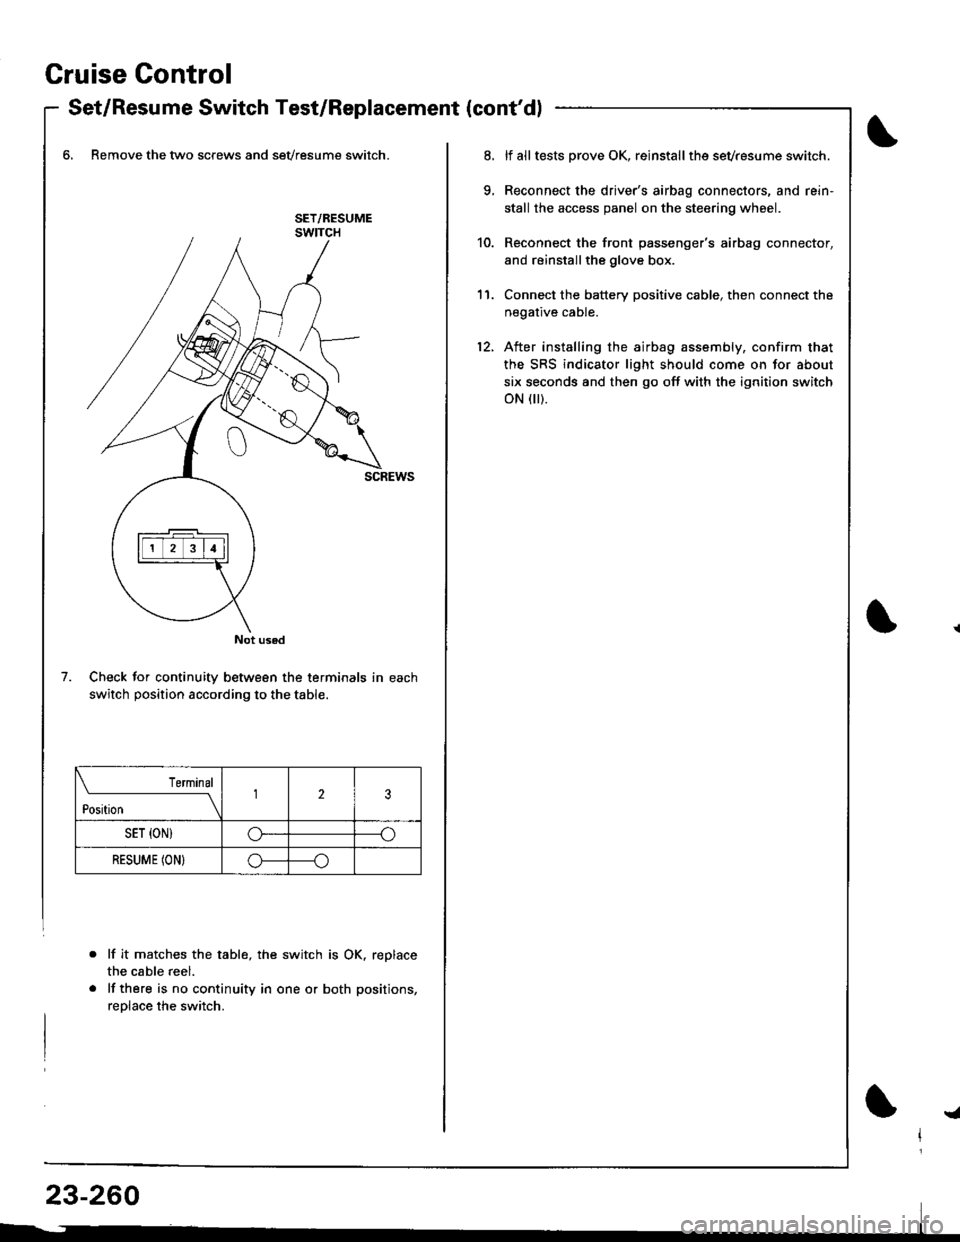 HONDA INTEGRA 1998 4.G User Guide Gruise Control
- Set/Resume Switch Test/Replacement {contdl
6, Remove the two screws and sevresume switch.
Check for continuity between the terminals in each
switch position according to the table.
l